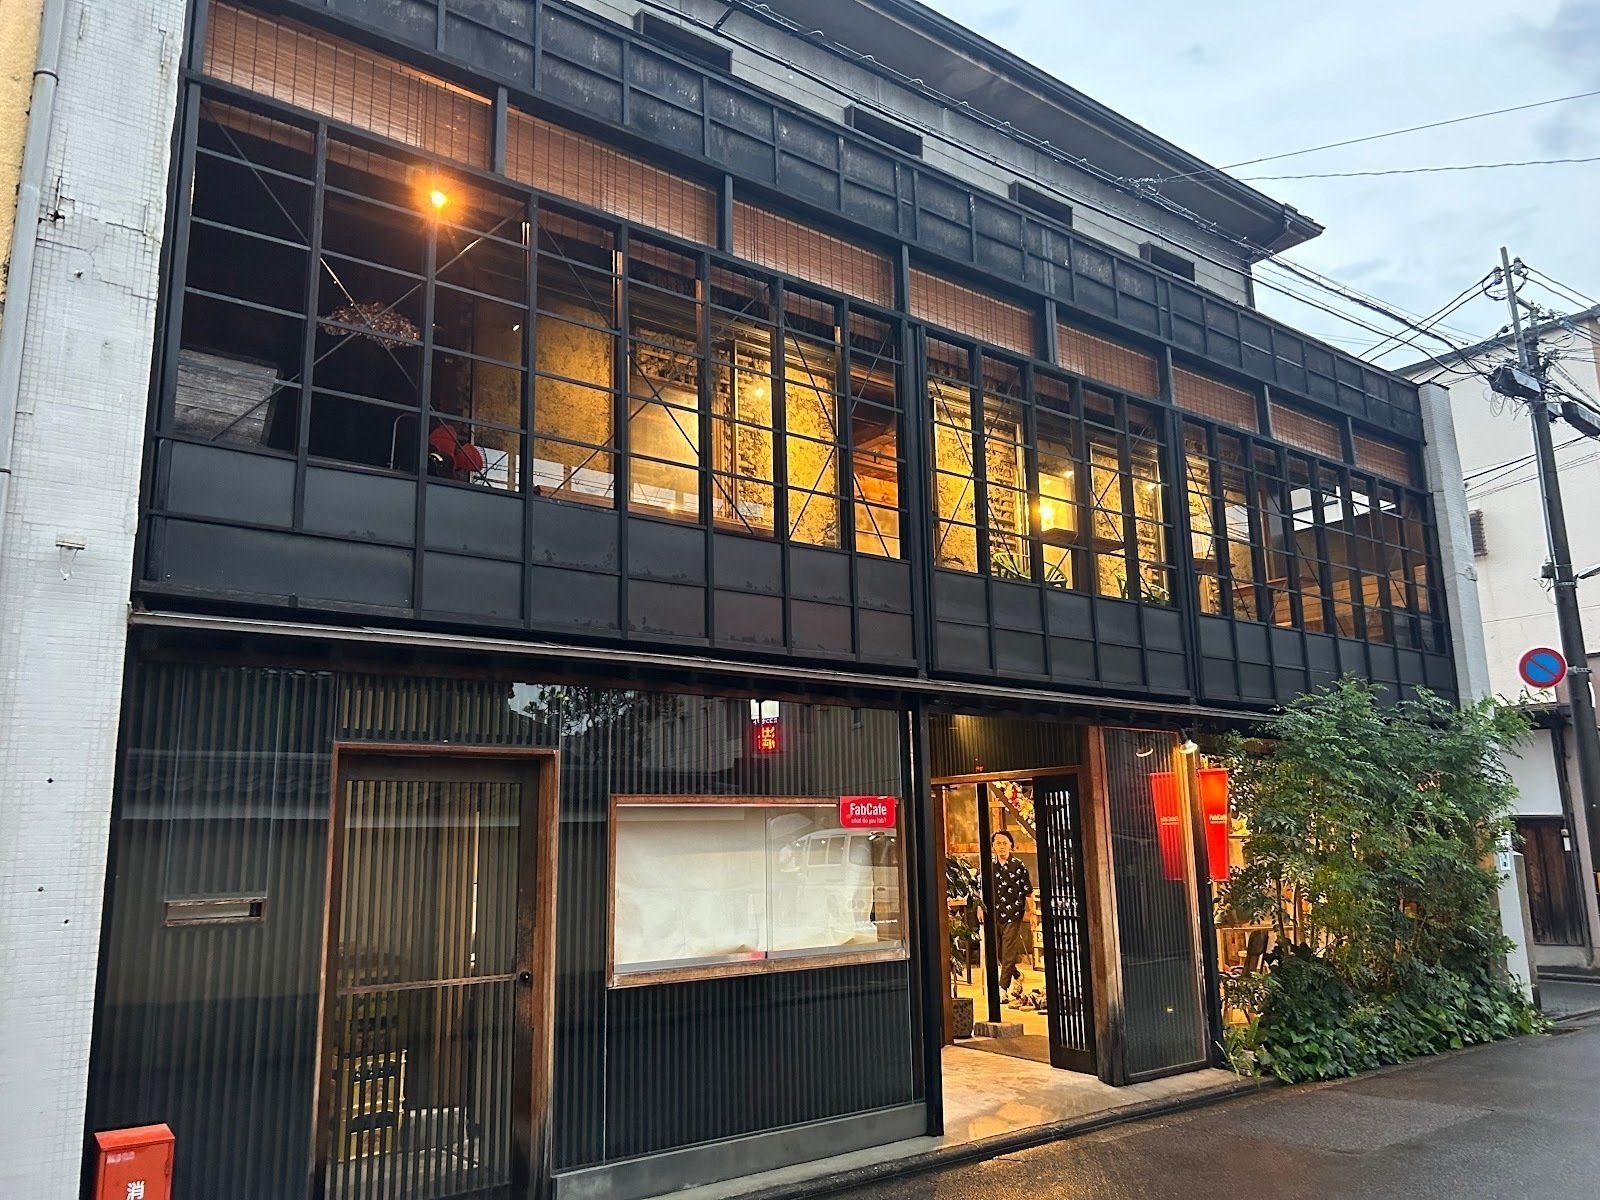 <span class="translation_missing" title="translation missing: en.meta.location_title, location_name: FabCafe Kyoto, city: Kyoto">Location Title</span>